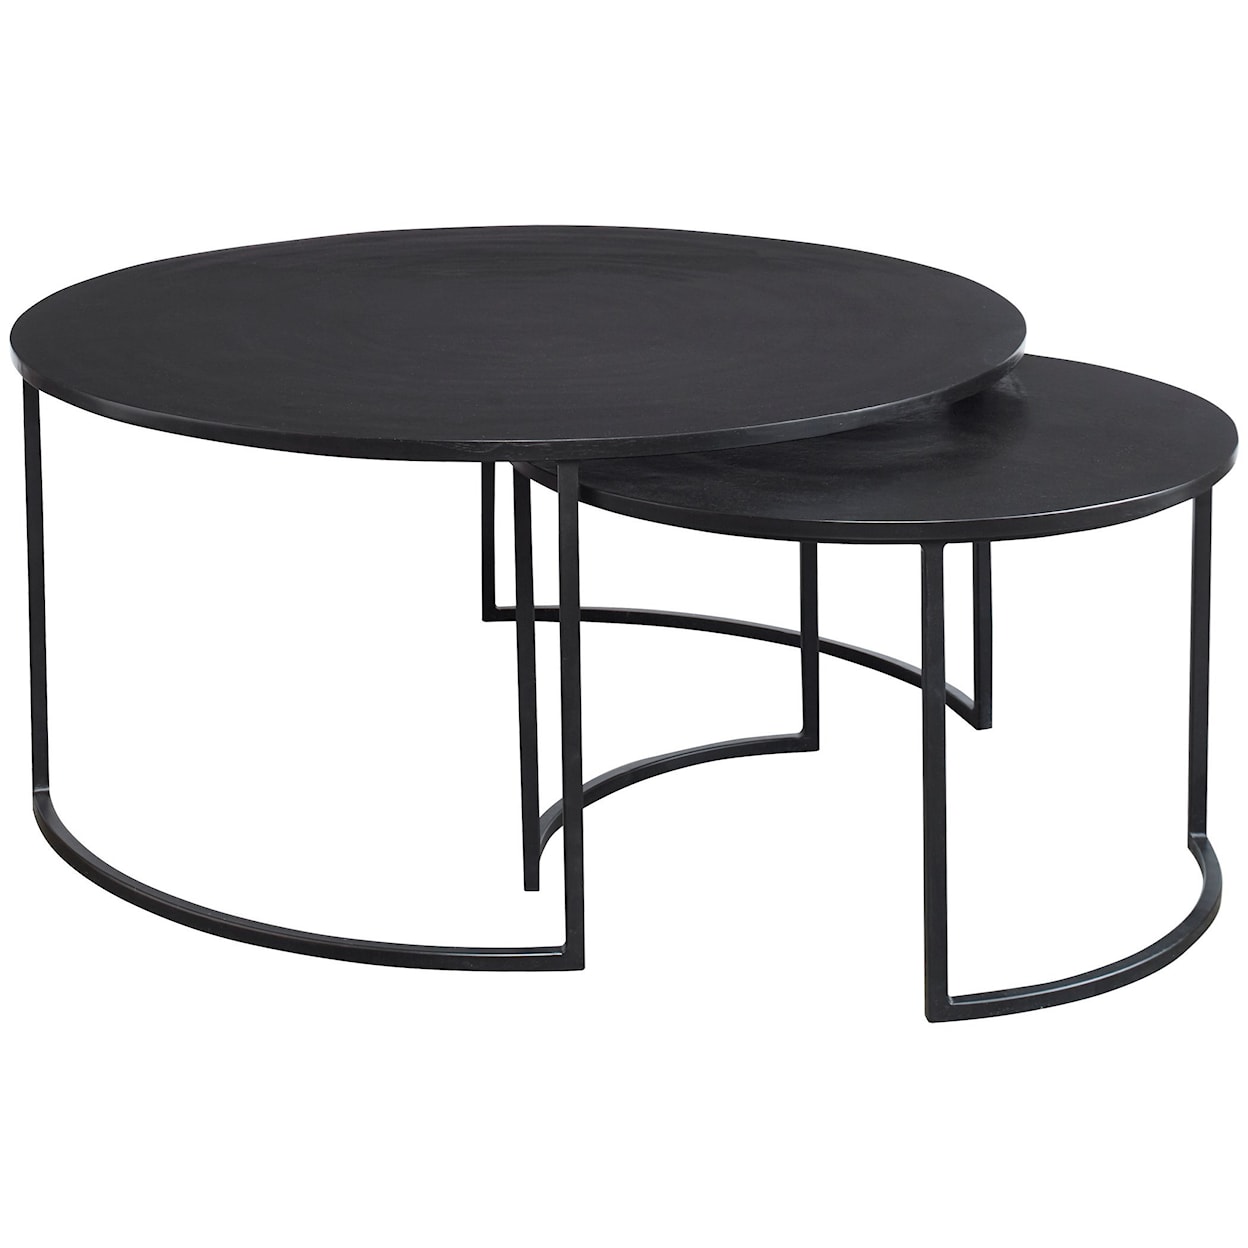 Uttermost Accent Furniture - Occasional Tables Barnette Modern Nesting Coffee Tables S/2